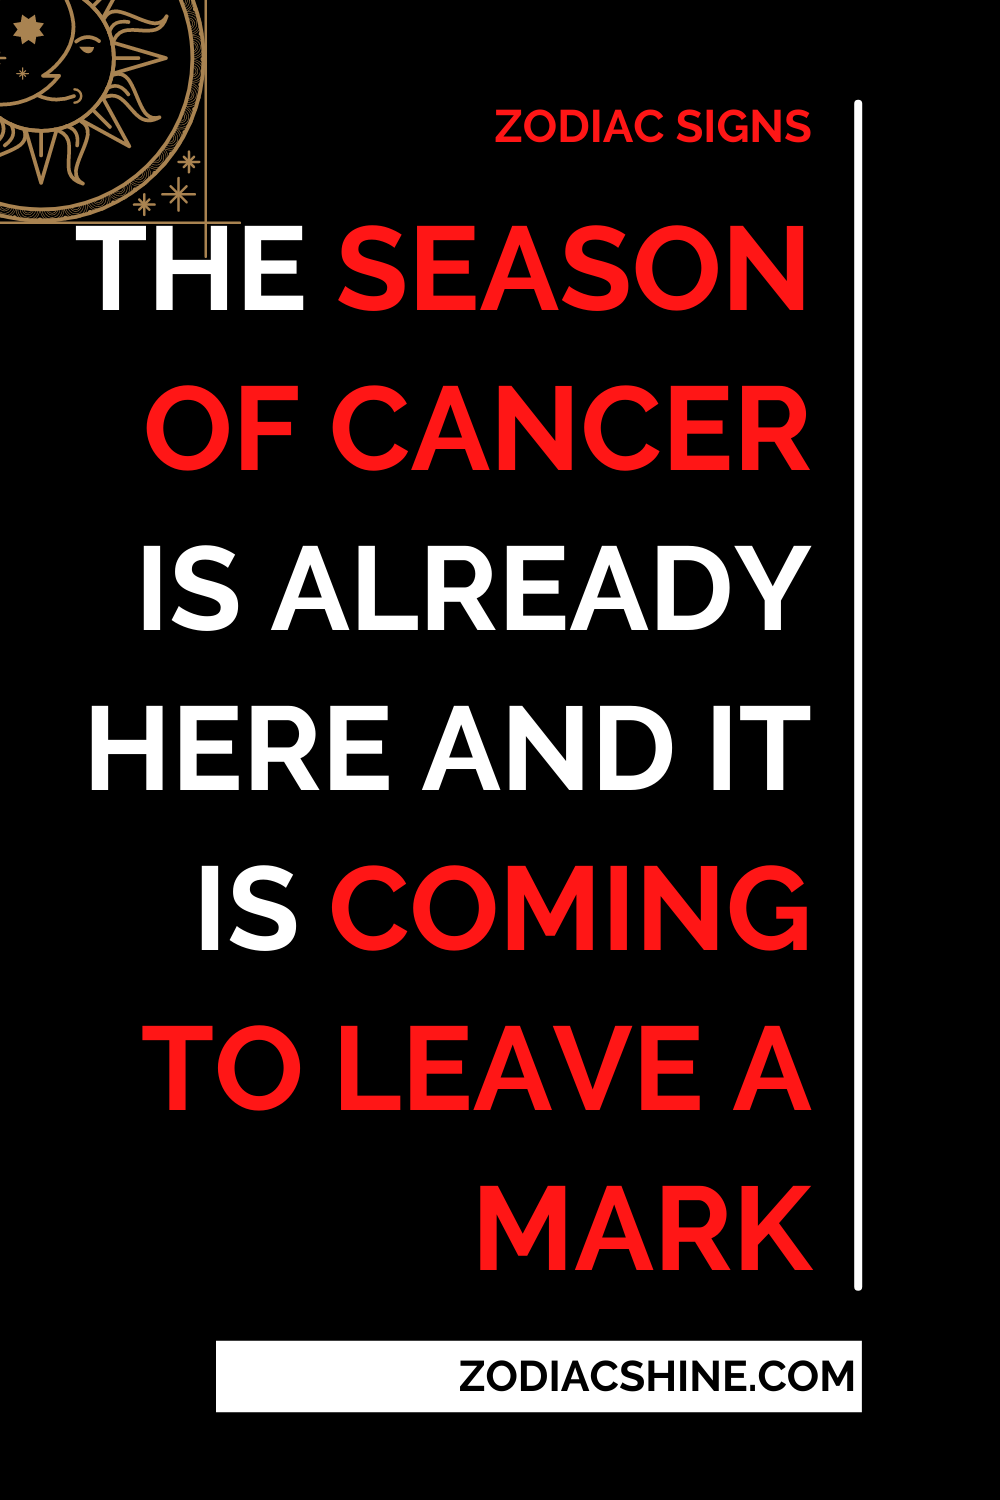 The Season Of Cancer Is Already Here And It Is Coming To Leave A Mark